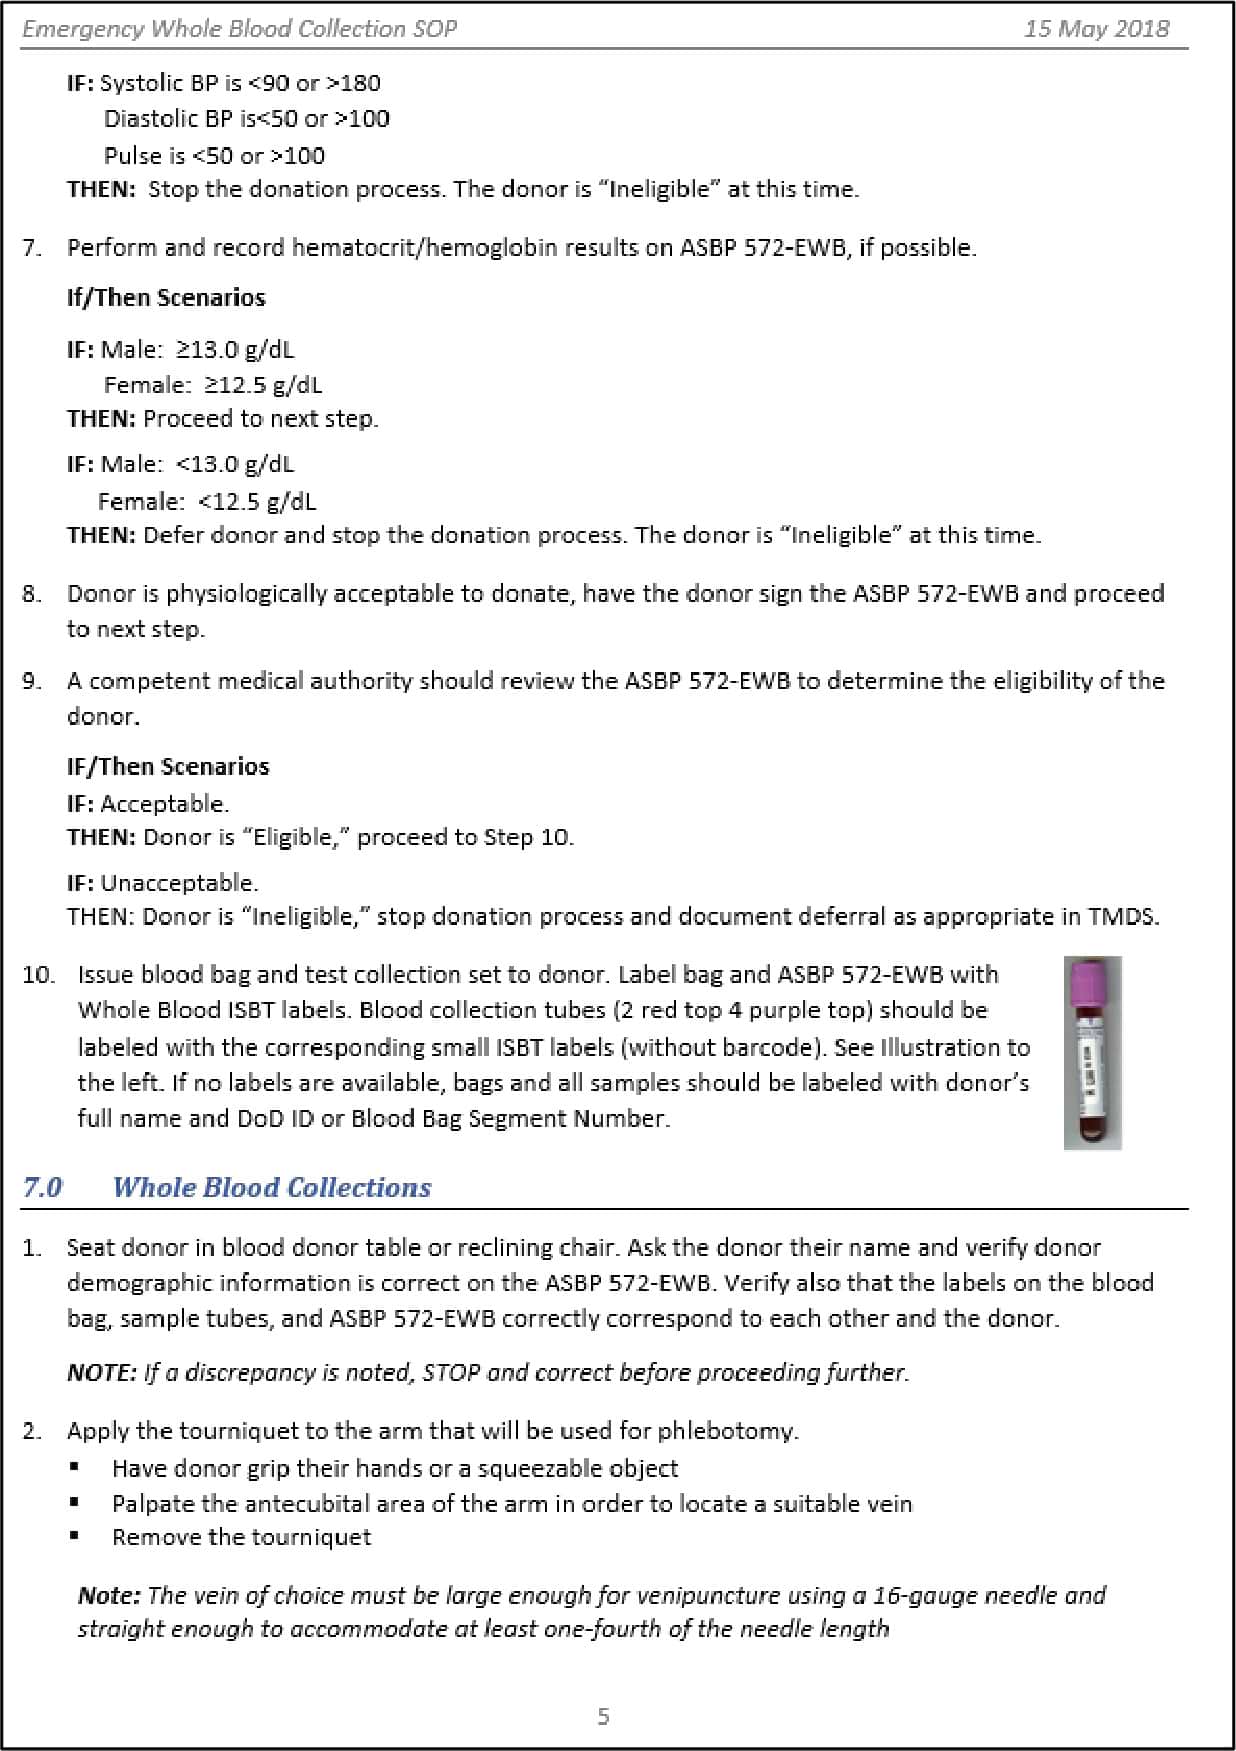 Emergency Whole Blood Collection SOP (Page 5)